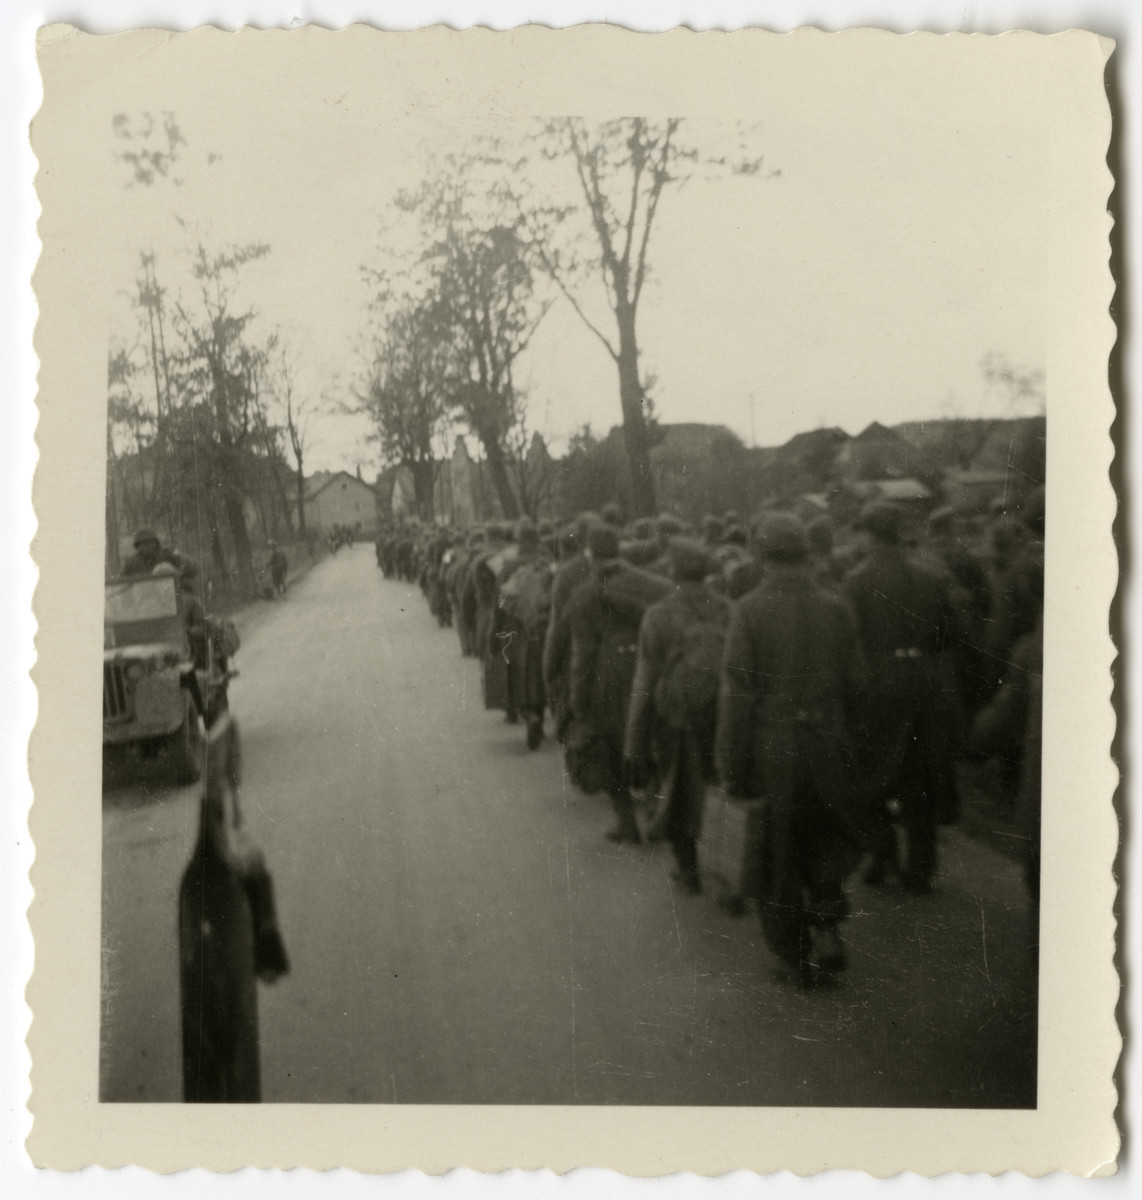 German POWs, captured by the American 261st Regiment, march down the road of an unidentified village.